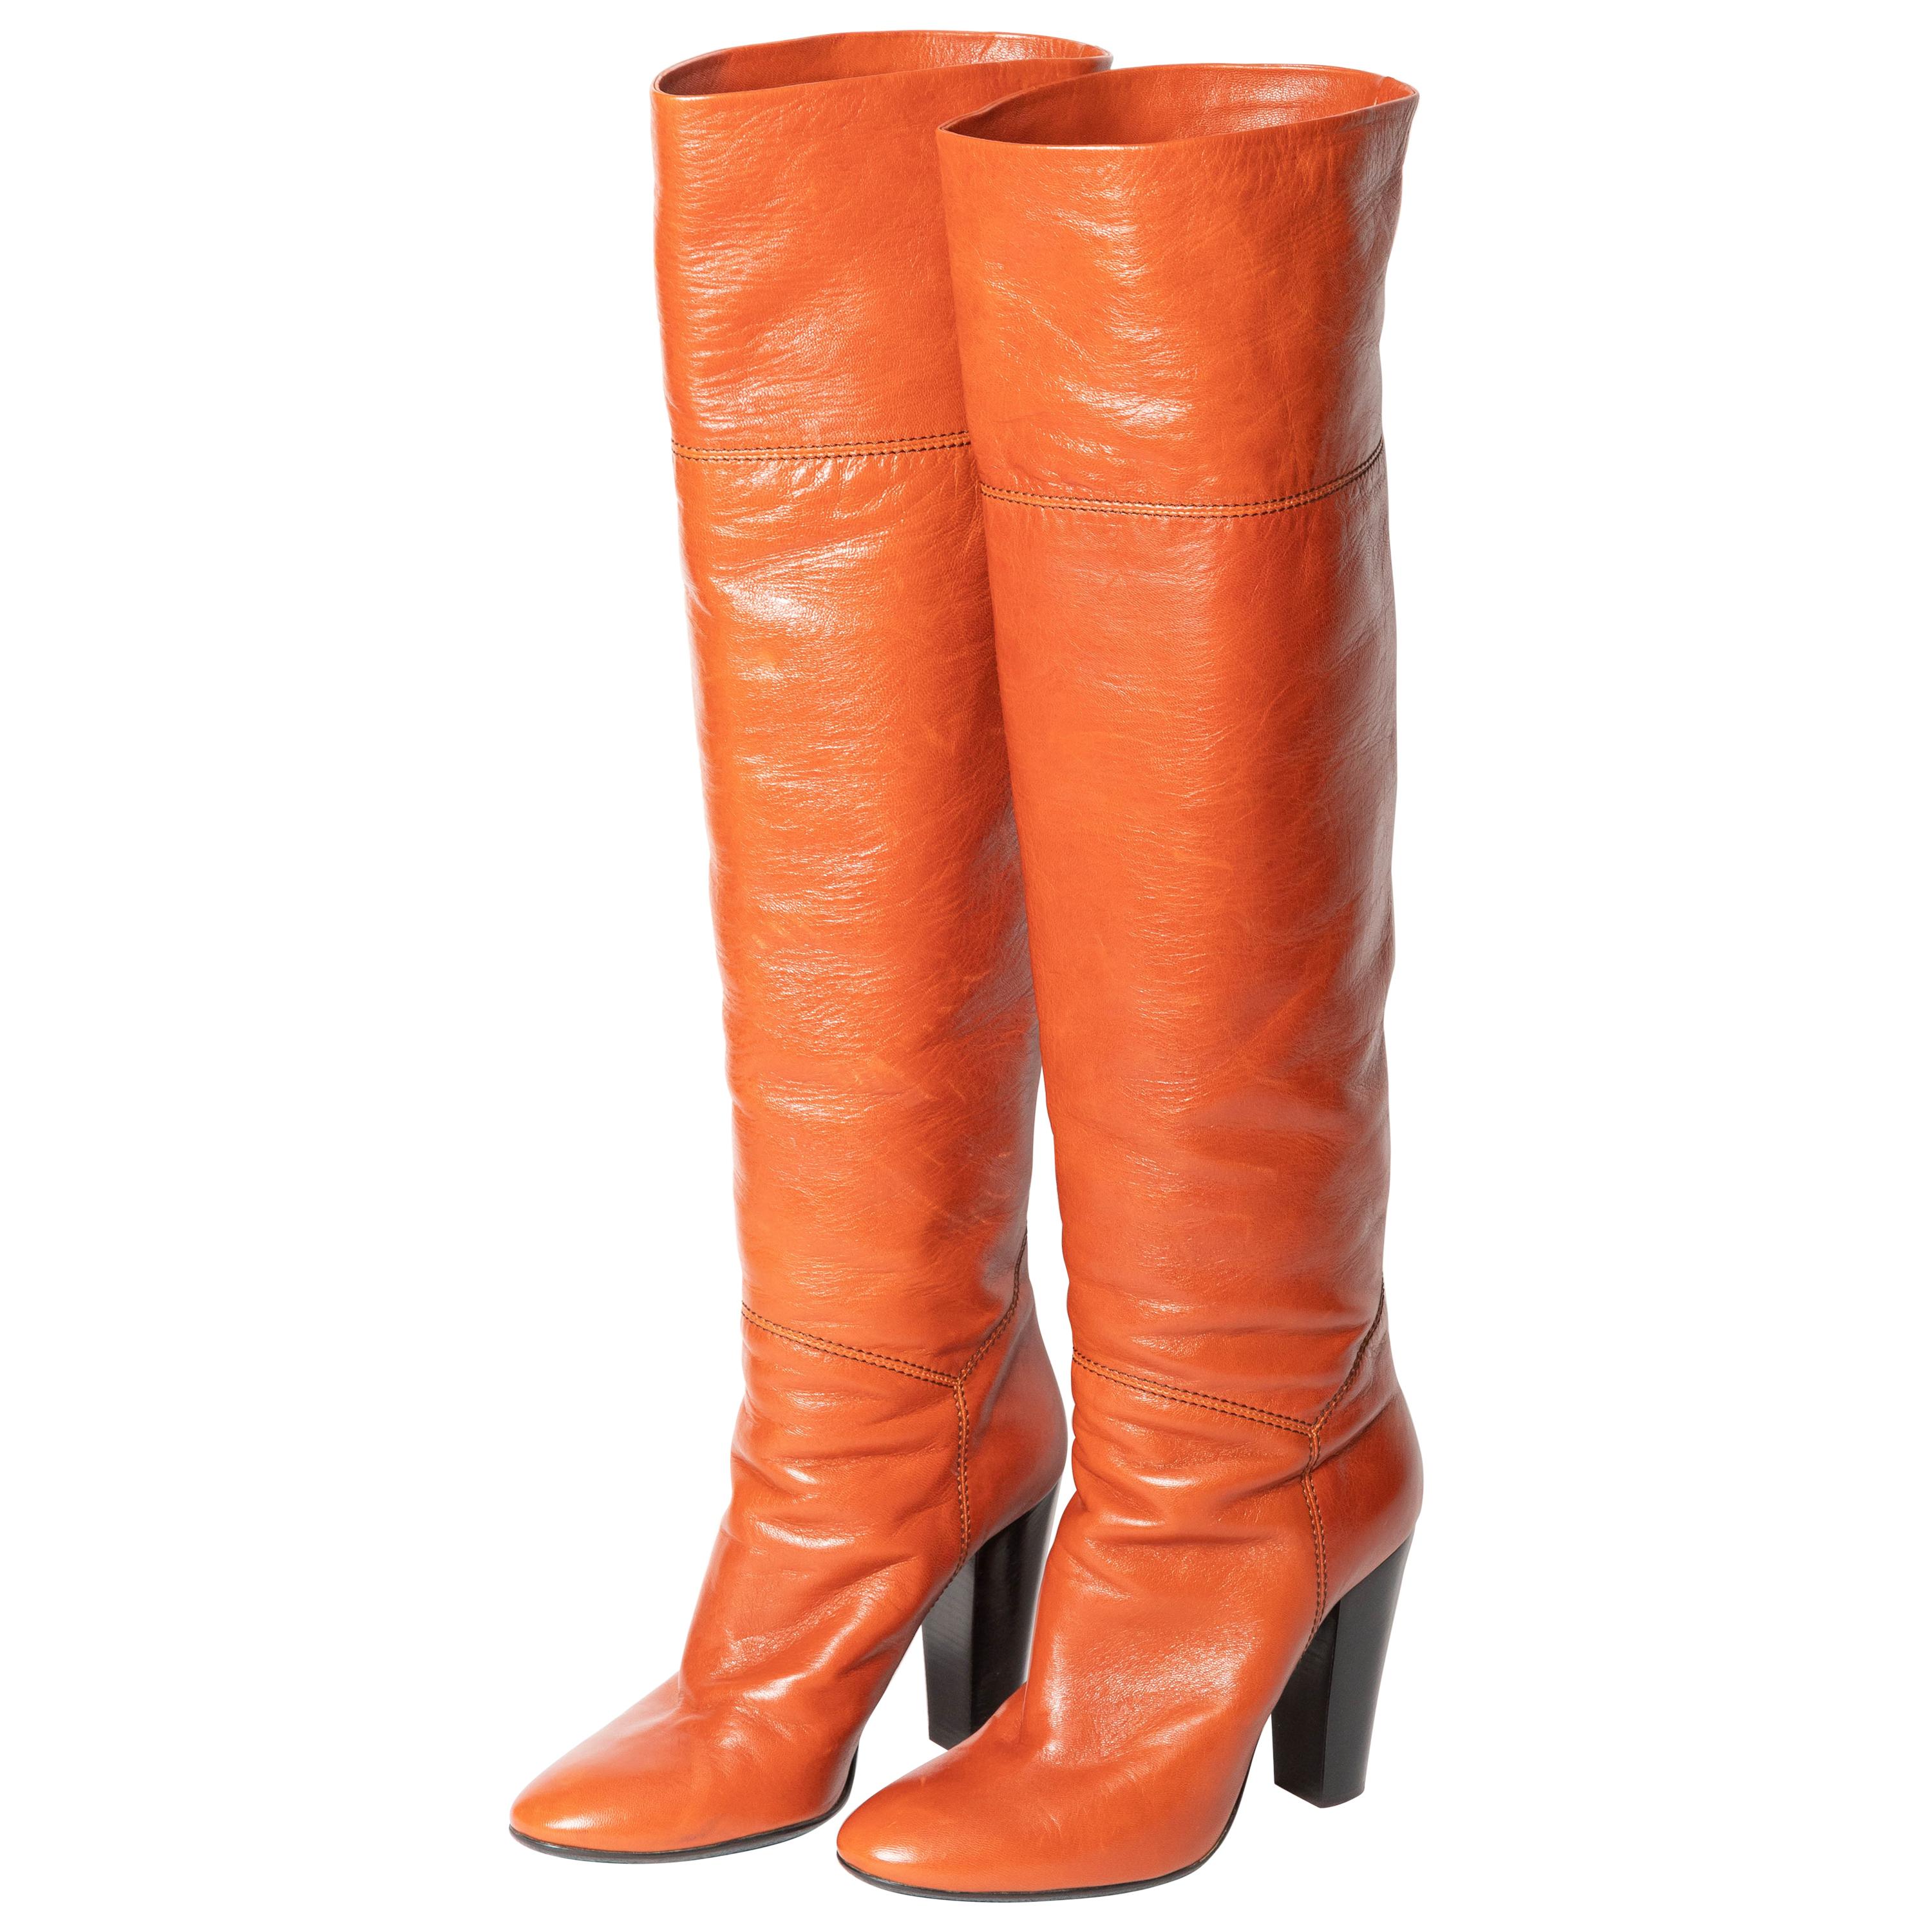 Giuseppe Zanotti Over the Knee Boots in Cognac - Size 39 For Sale